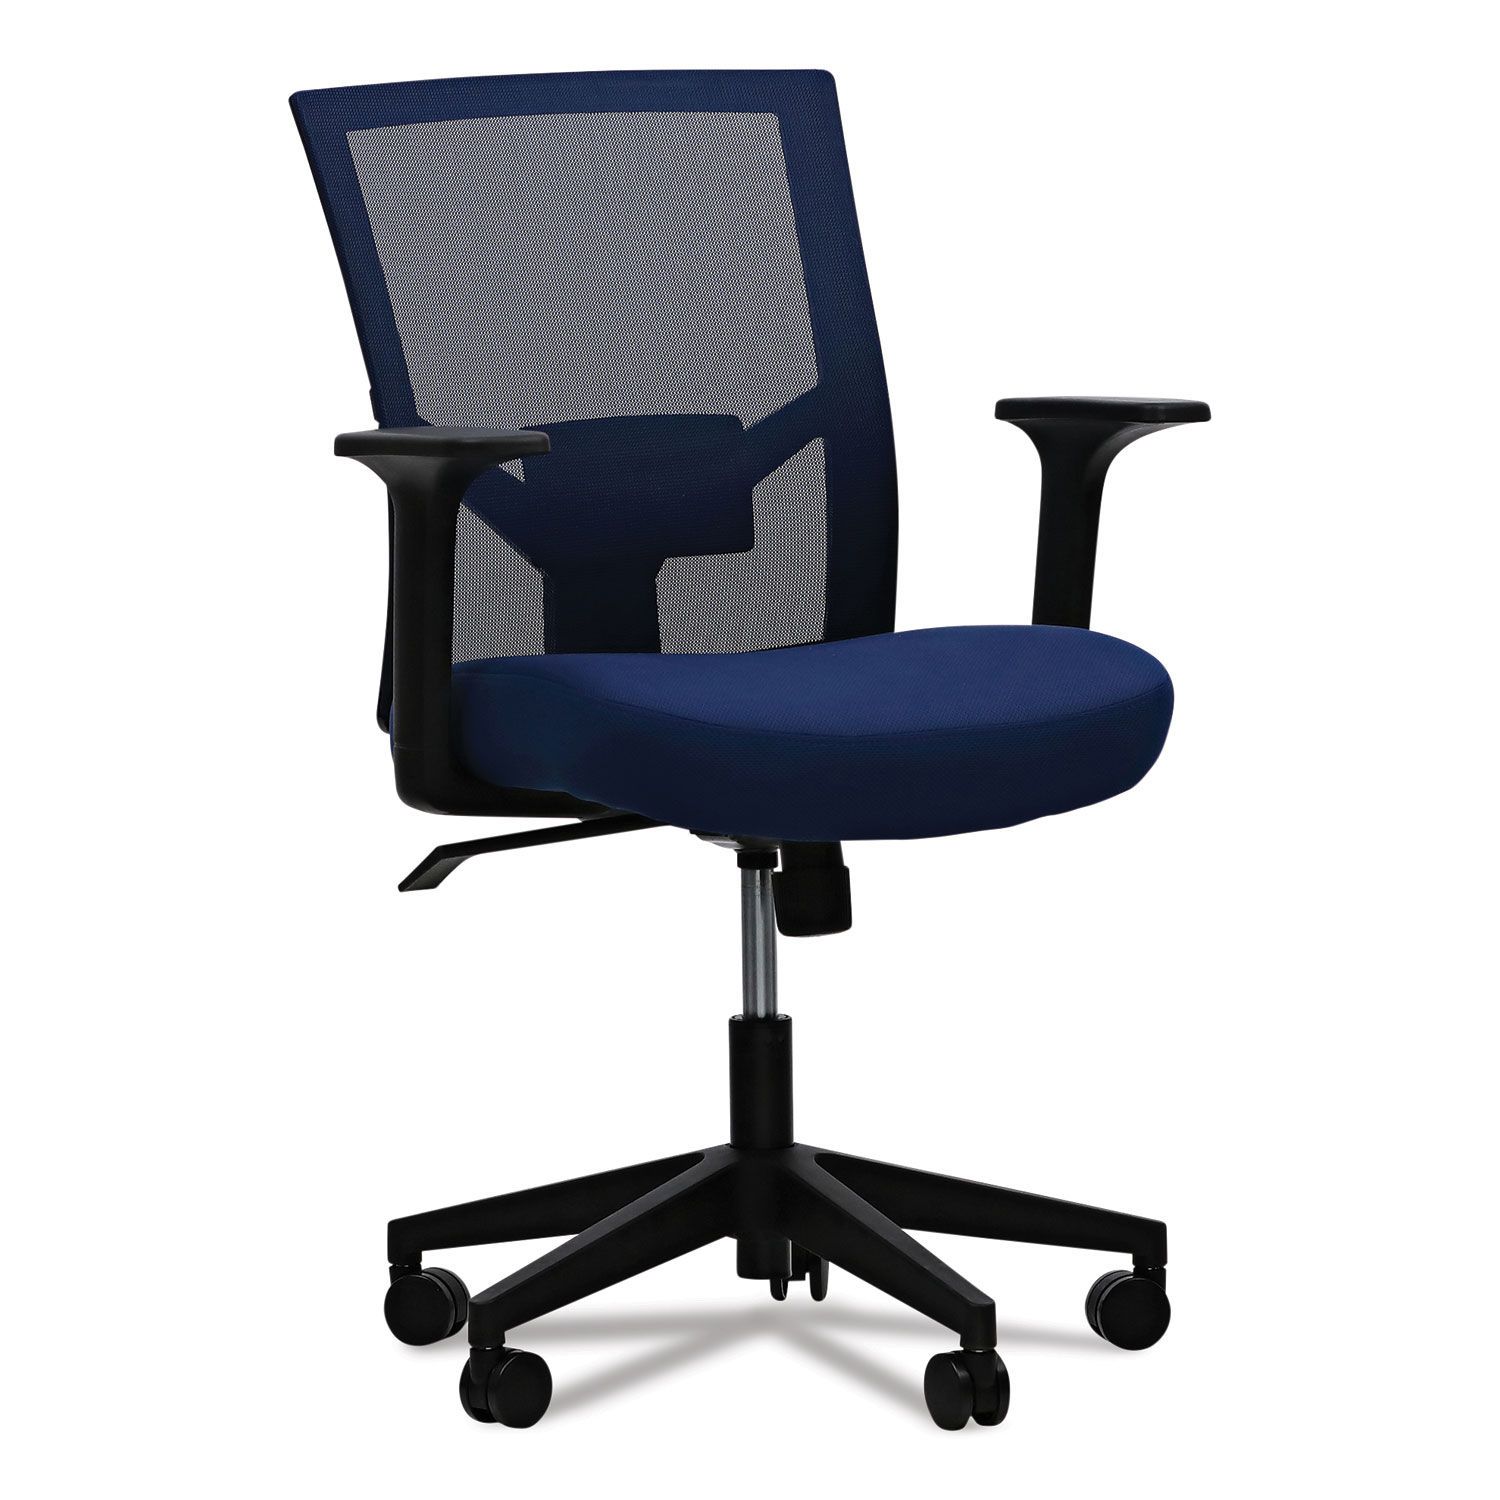 Mesh Back Fabric Task Chair Supports Up to 275 lb, 17.32" to 21.1" Seat Height, Navy Seat, Navy Back